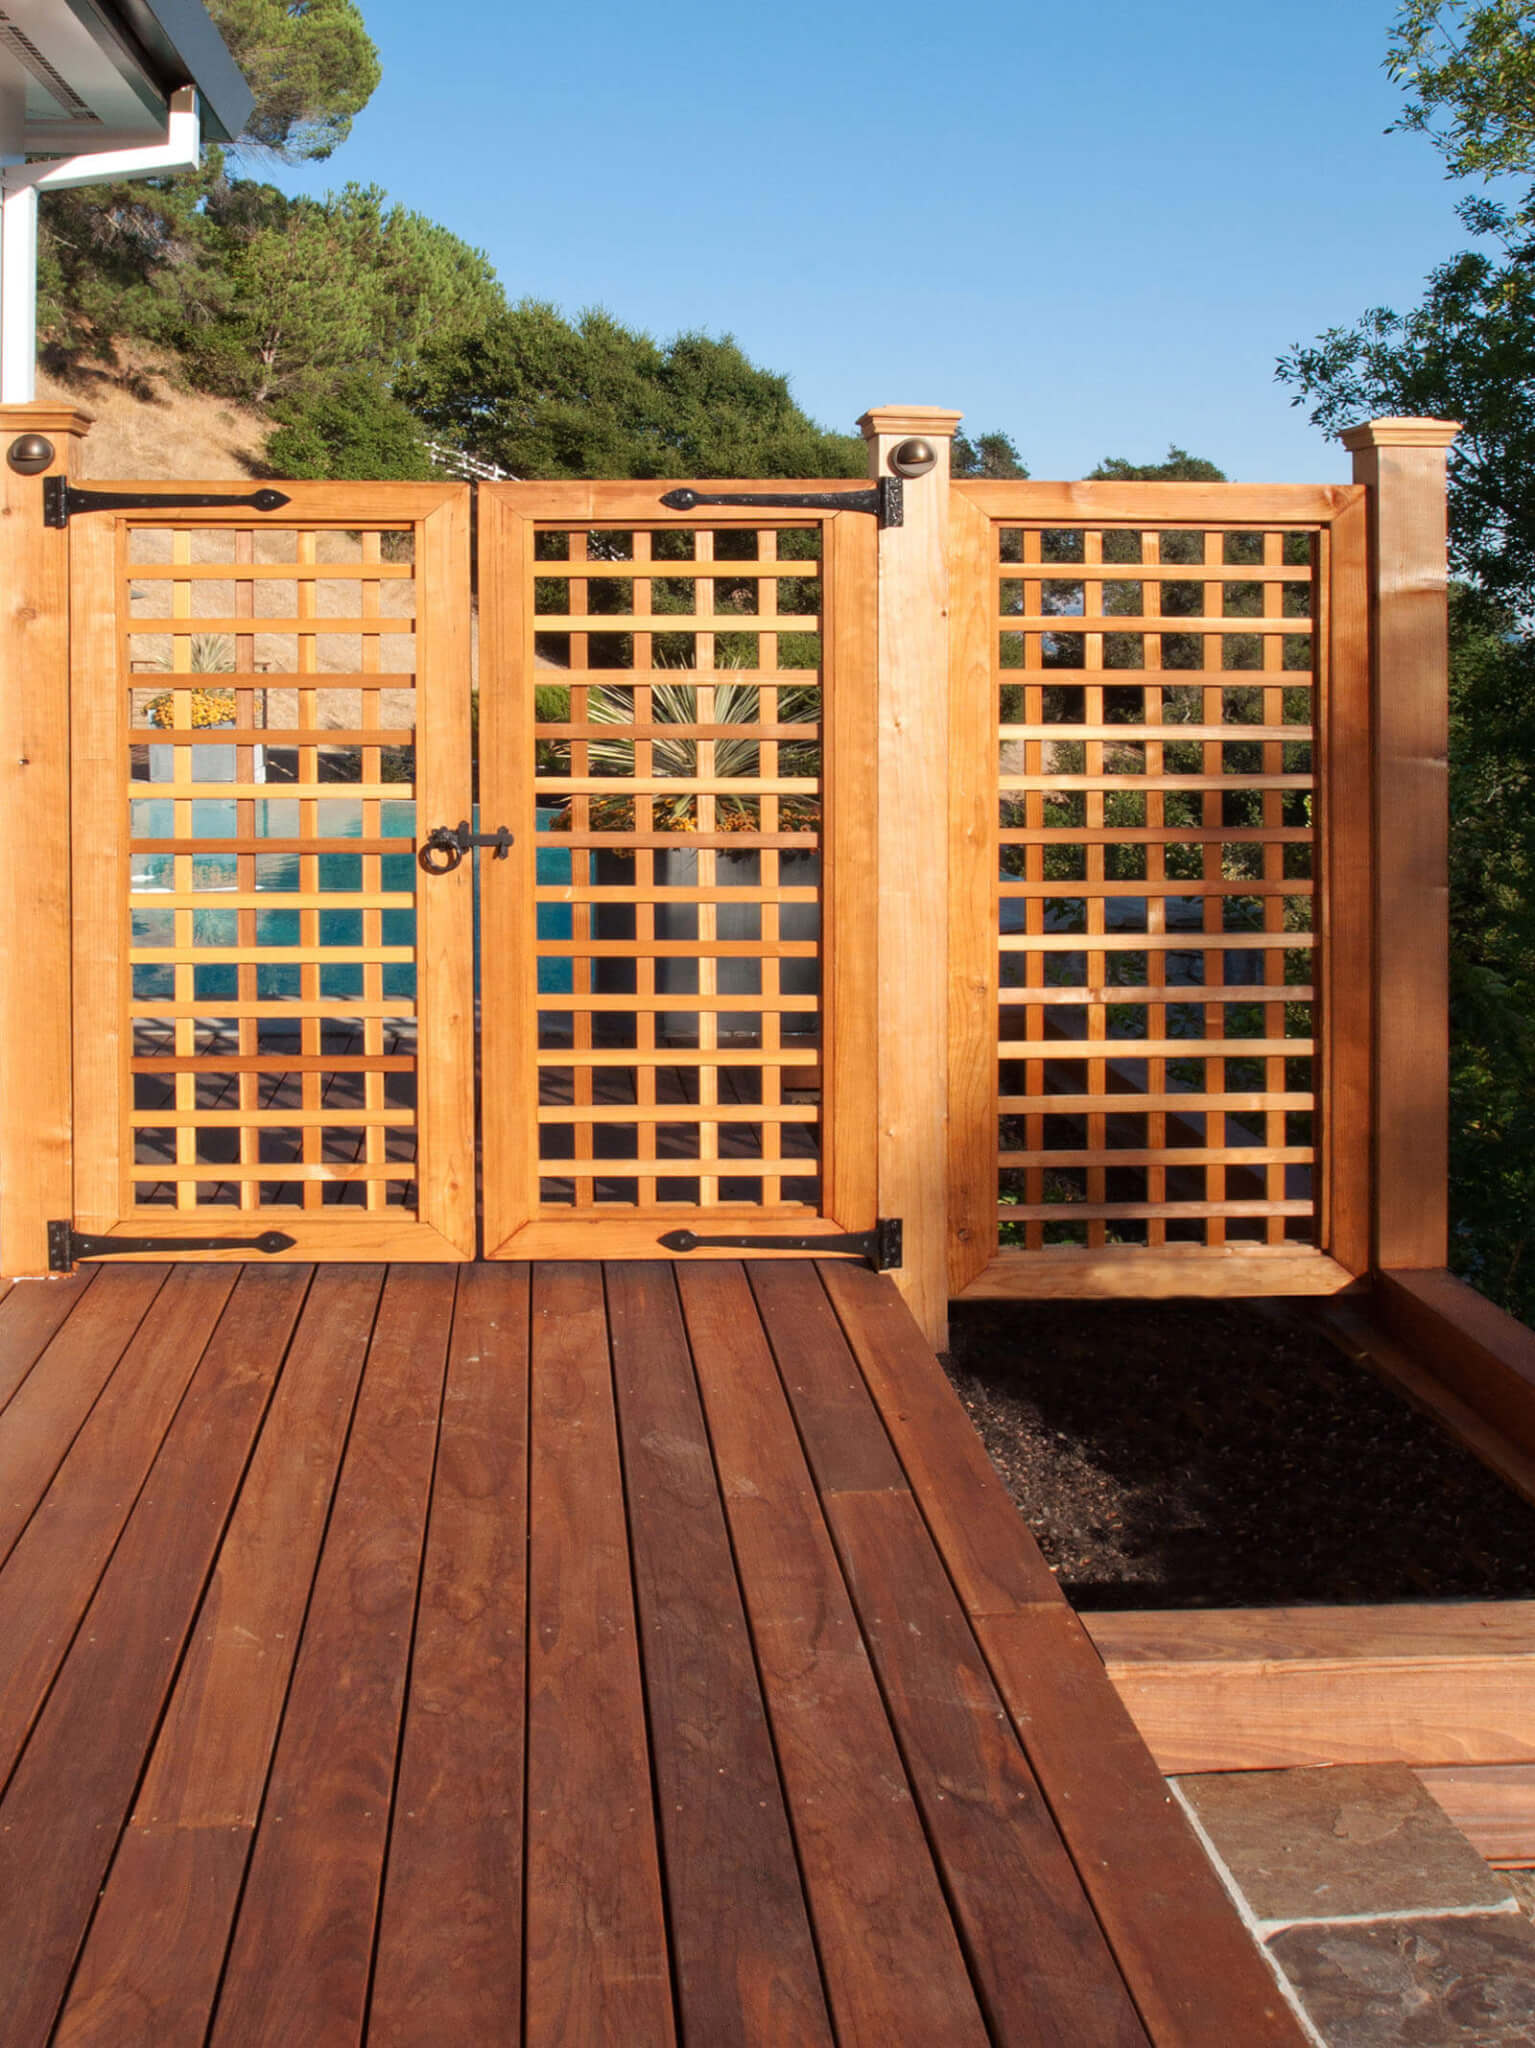 Tall wood lattice gate with wrought iron fixtures on a wood deck